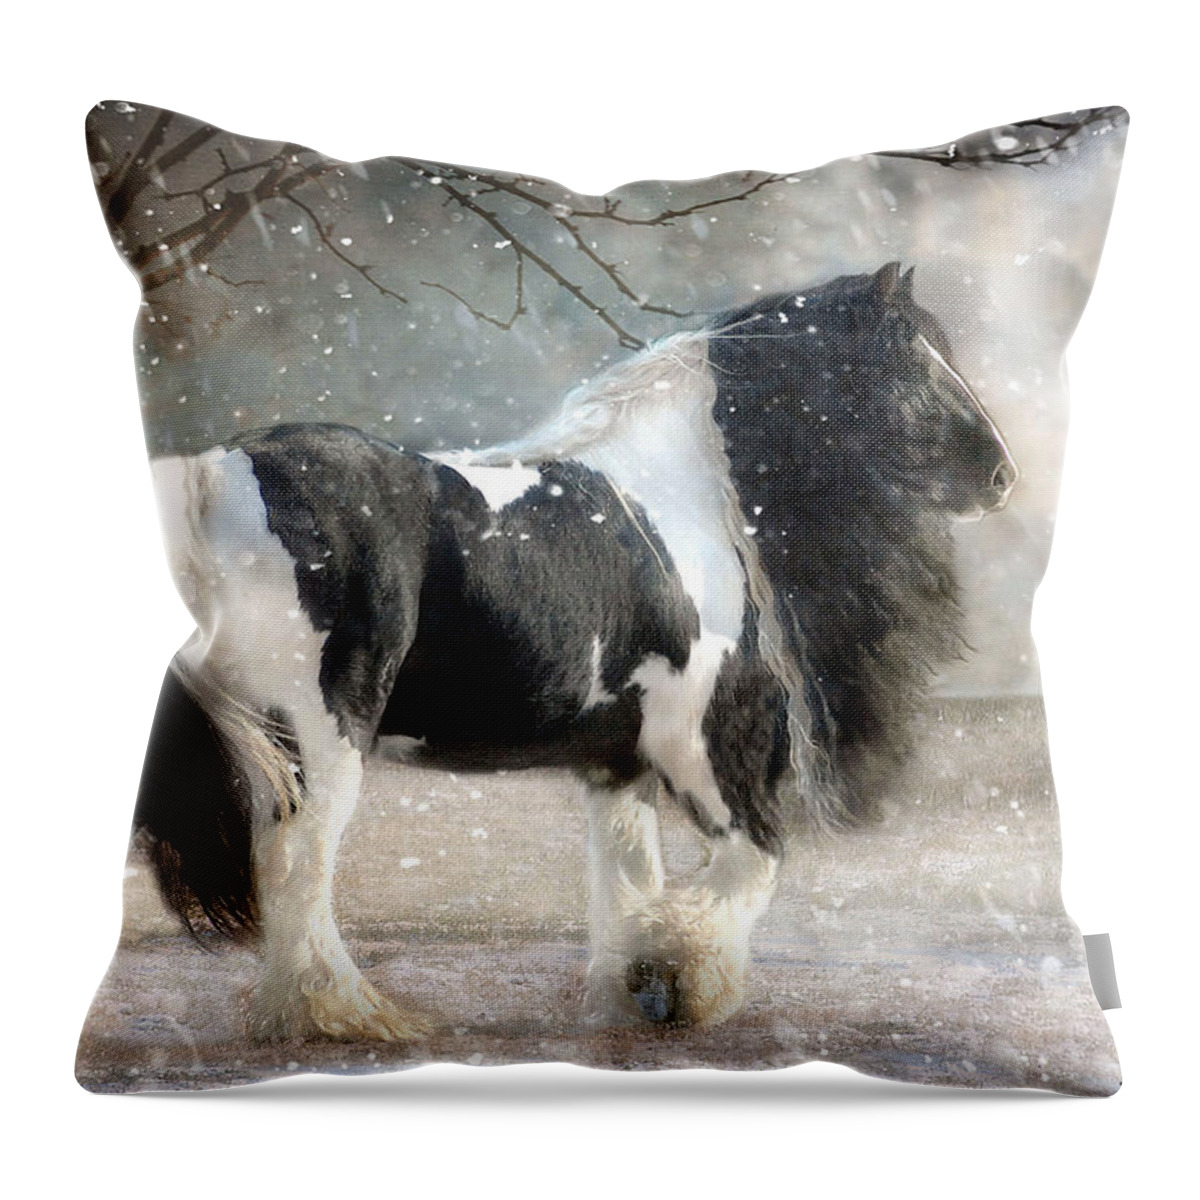 Horse Photographs Throw Pillow featuring the photograph Solitary by Fran J Scott